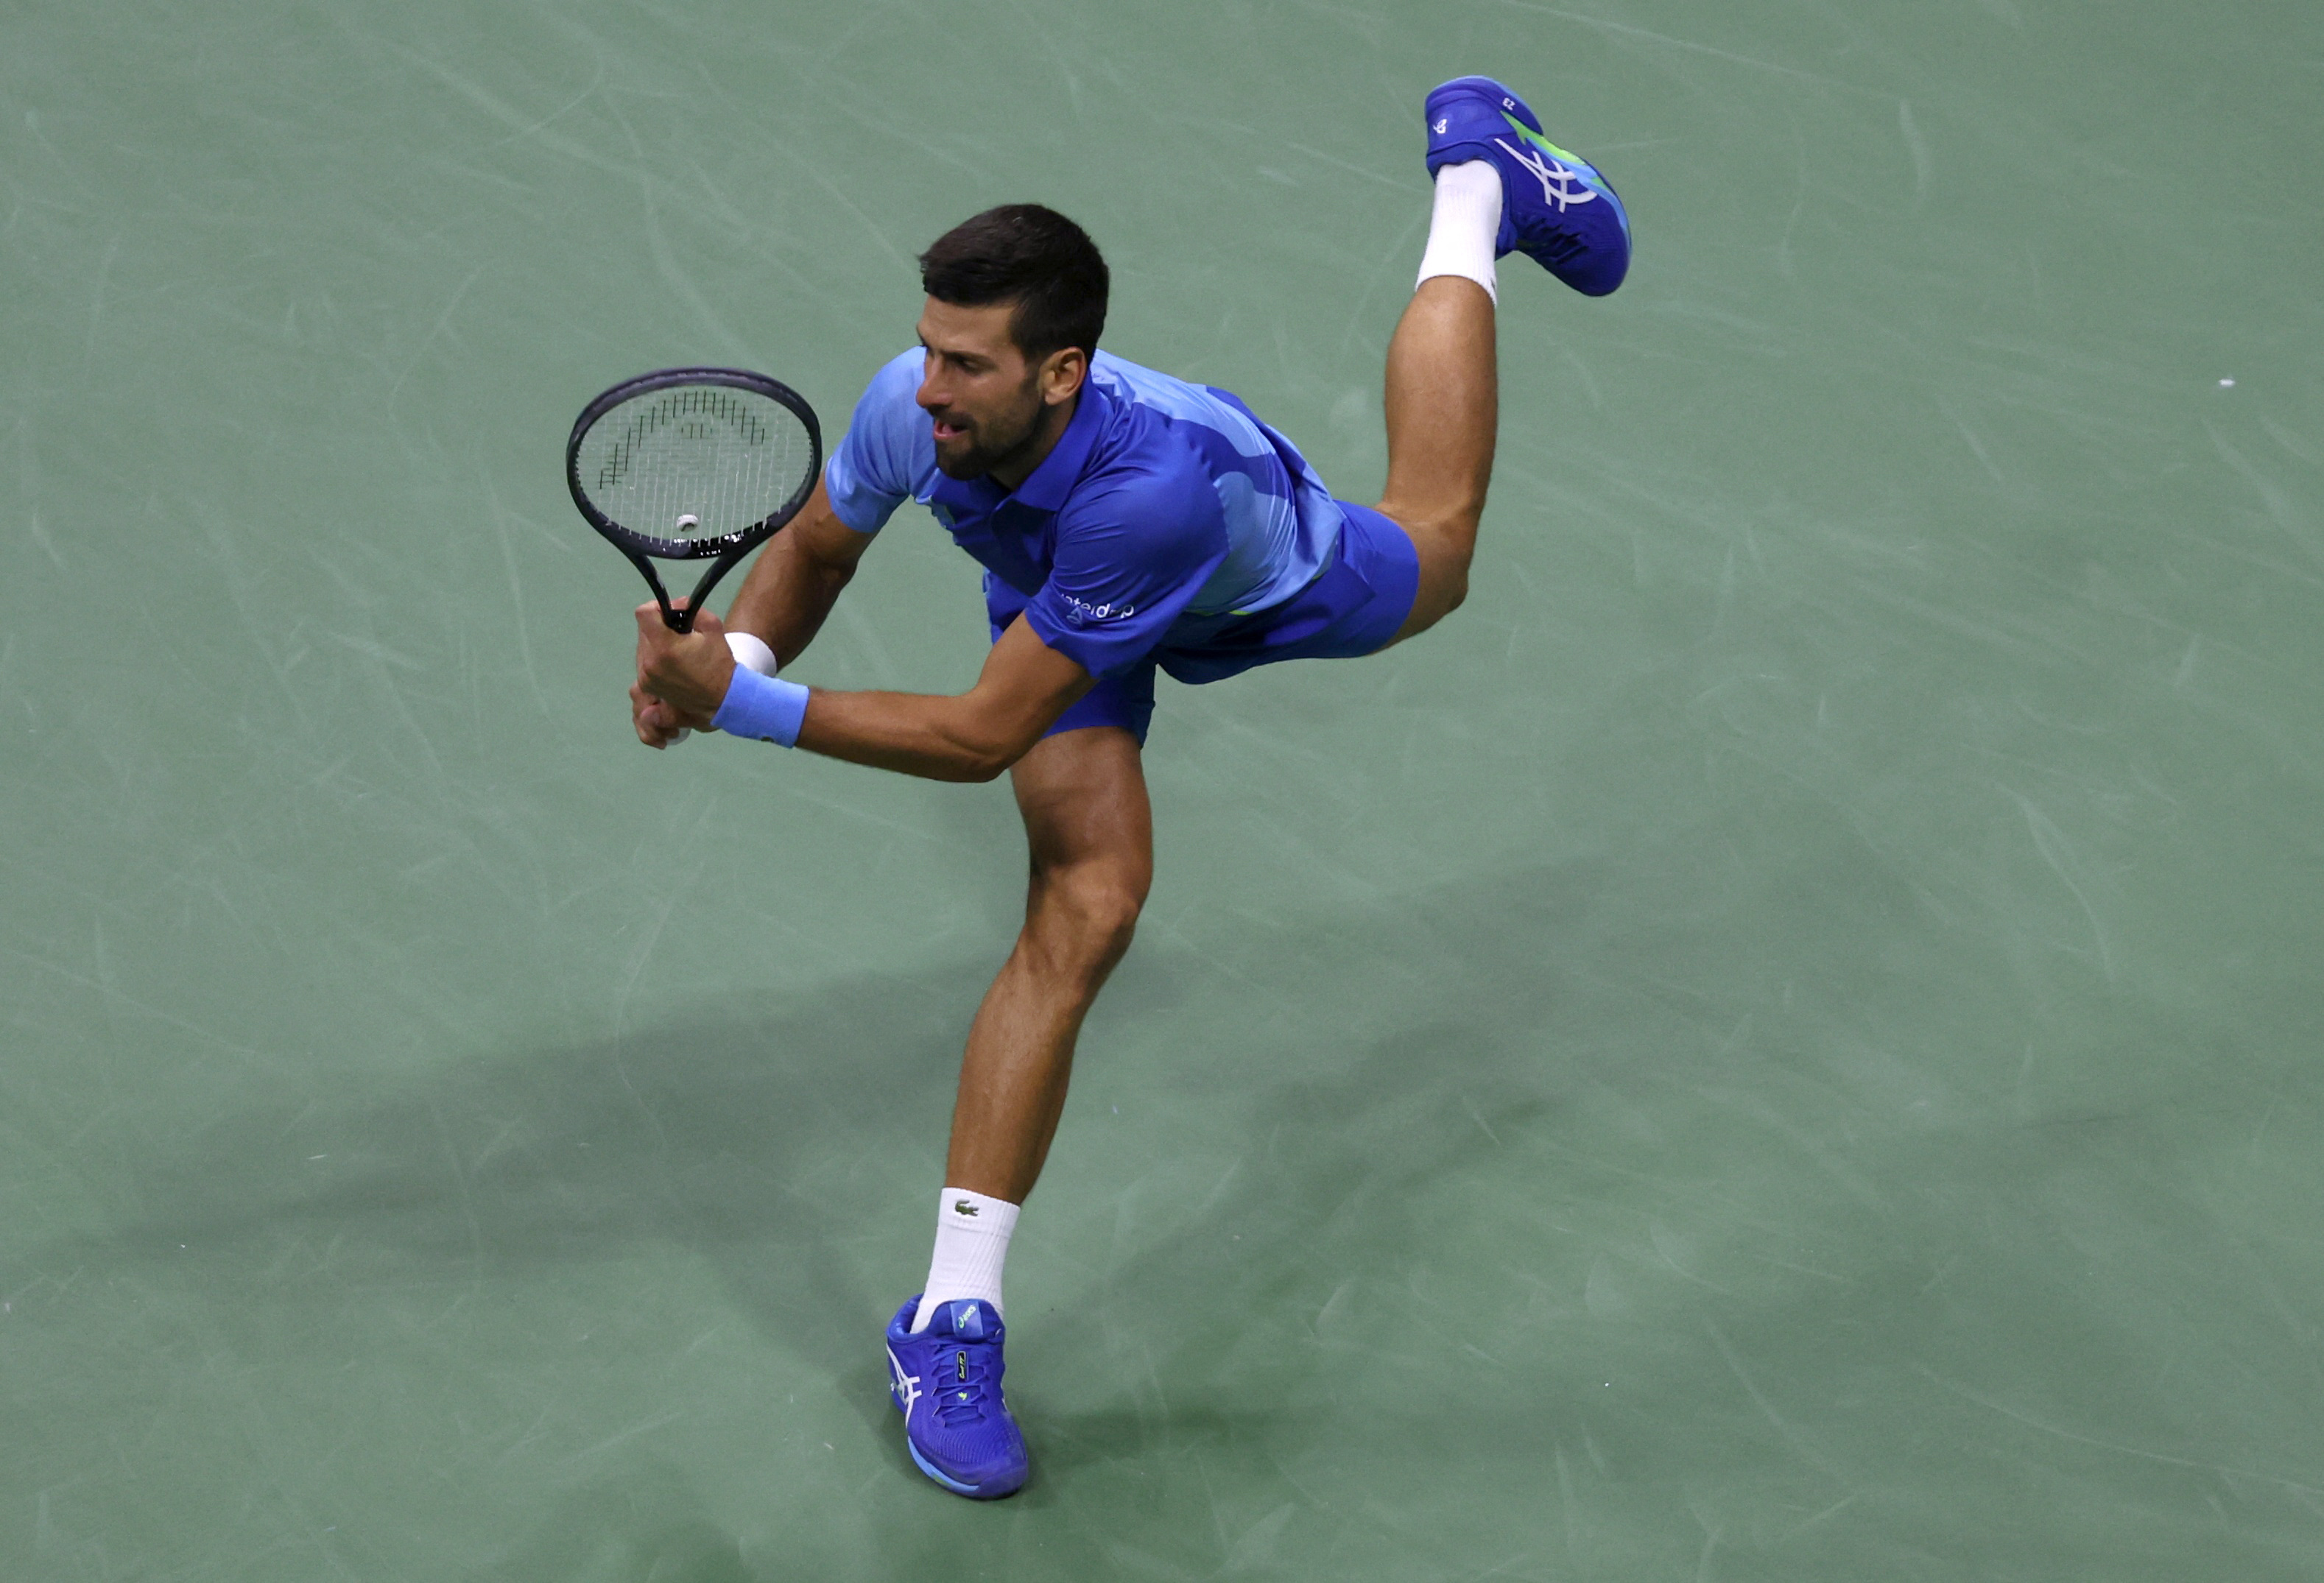 Djokovic fights back from two sets down to reach U.S